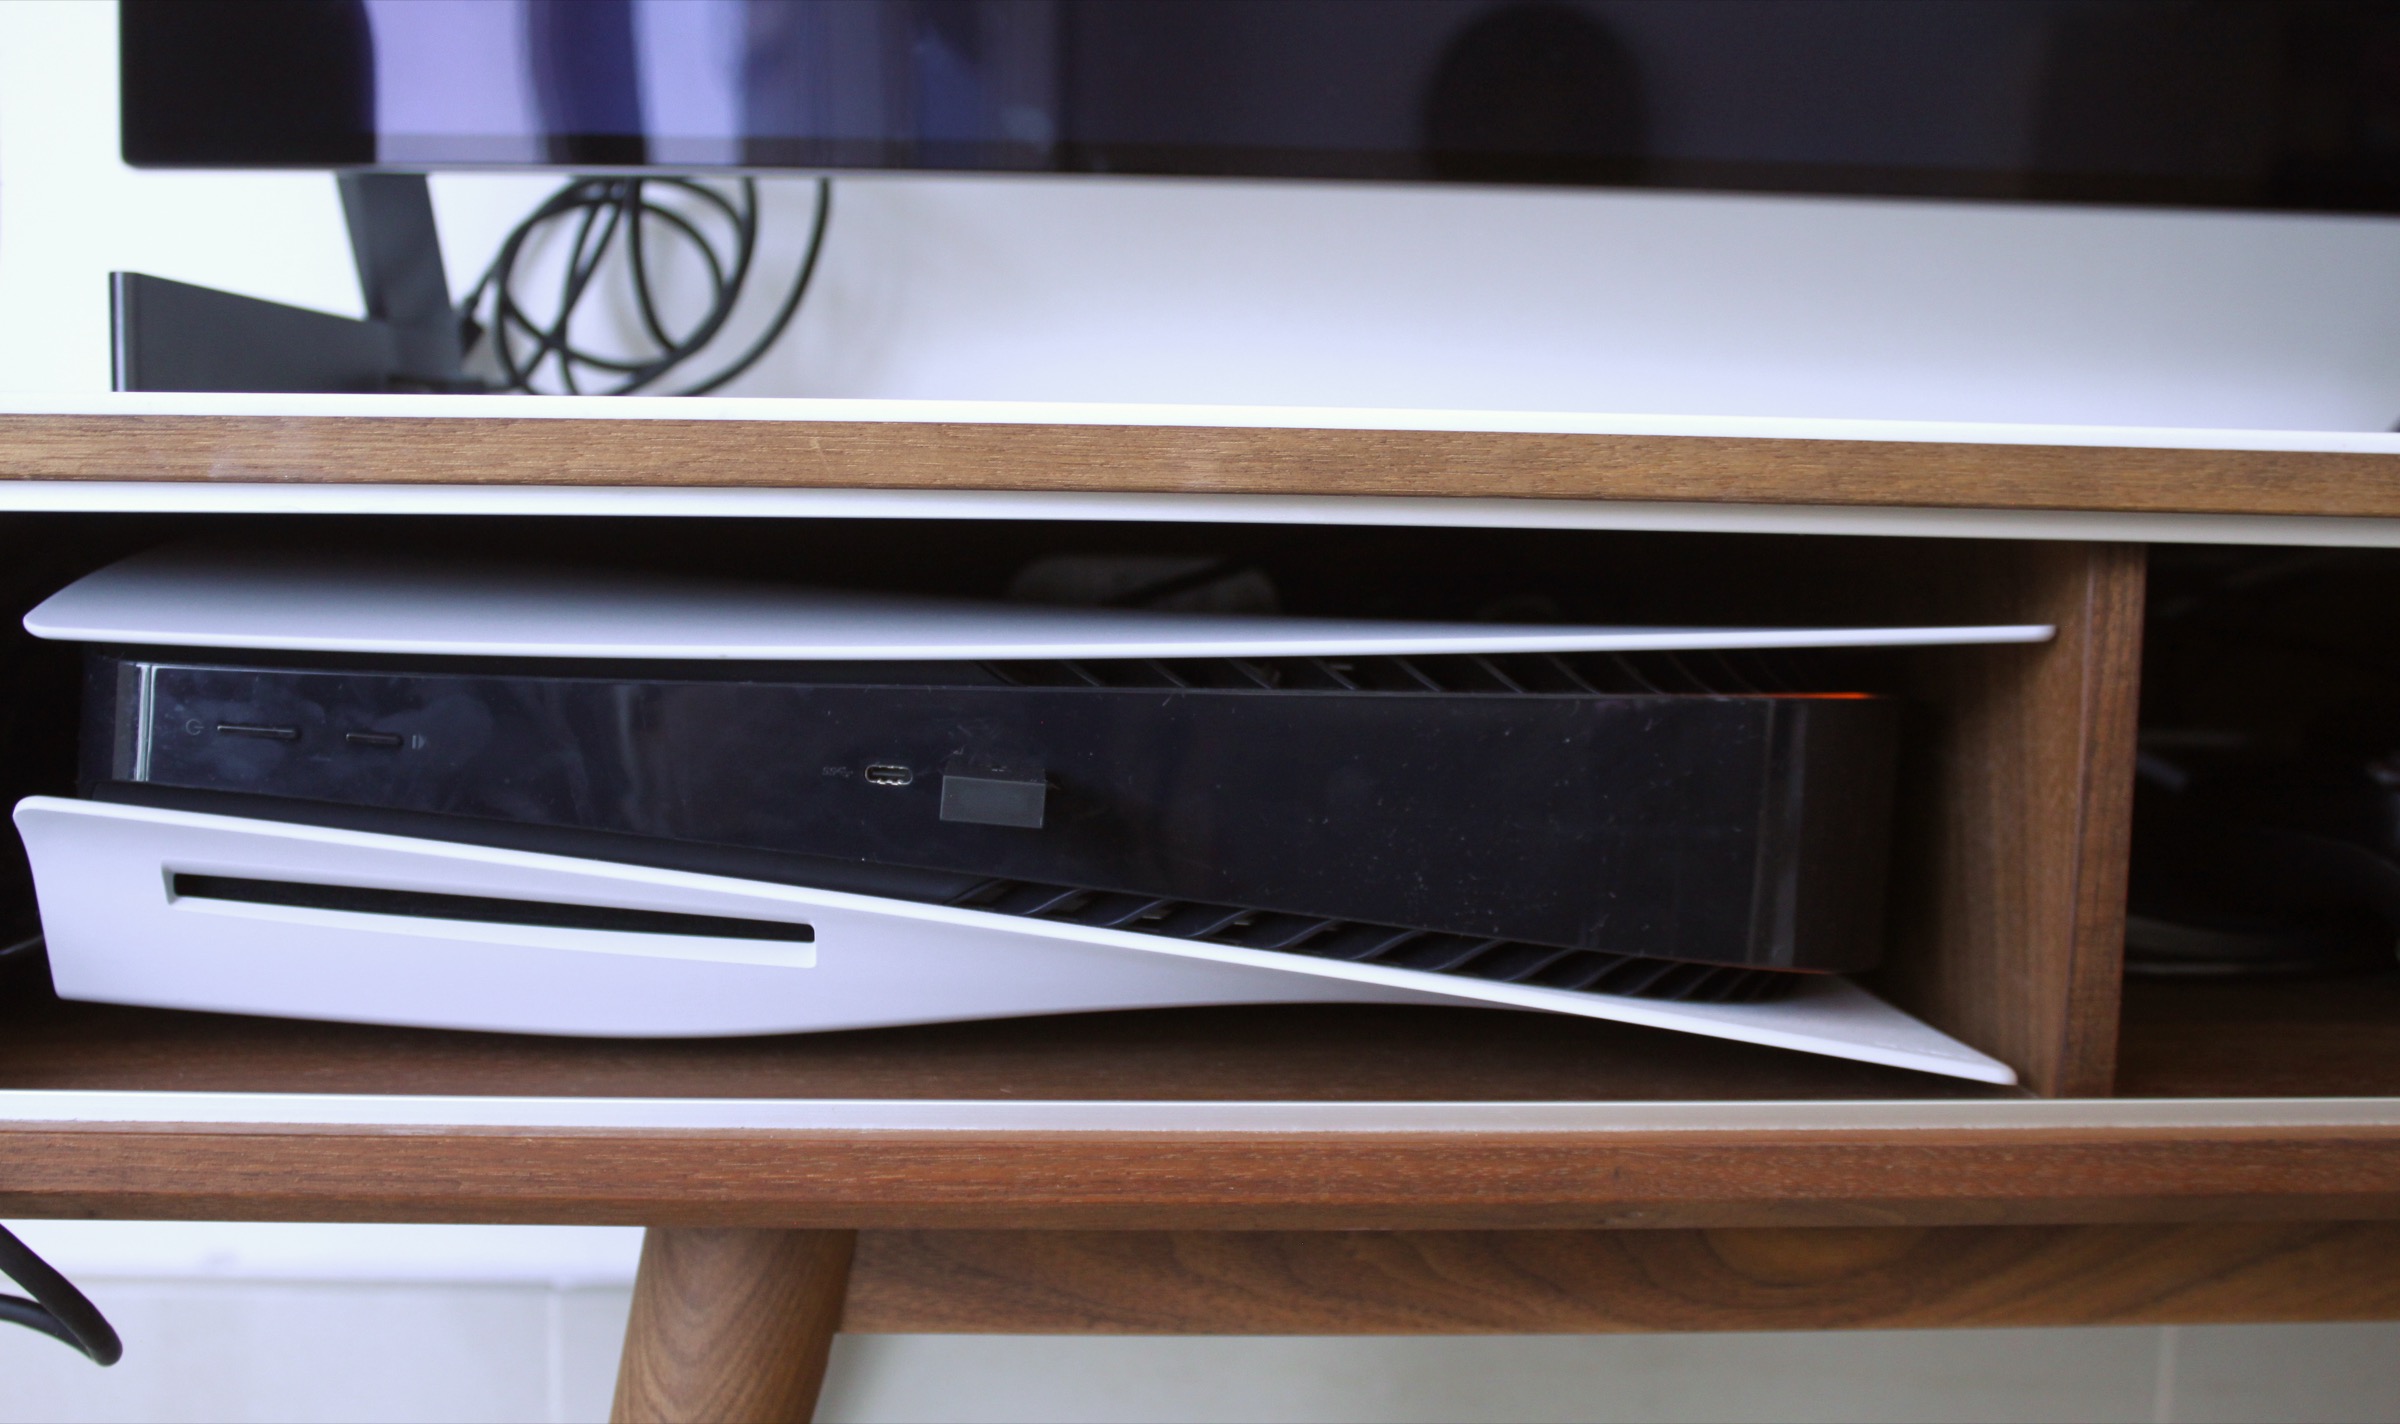 Creating the Ultimate Slim PlayStation 5: Overcoming Overheating